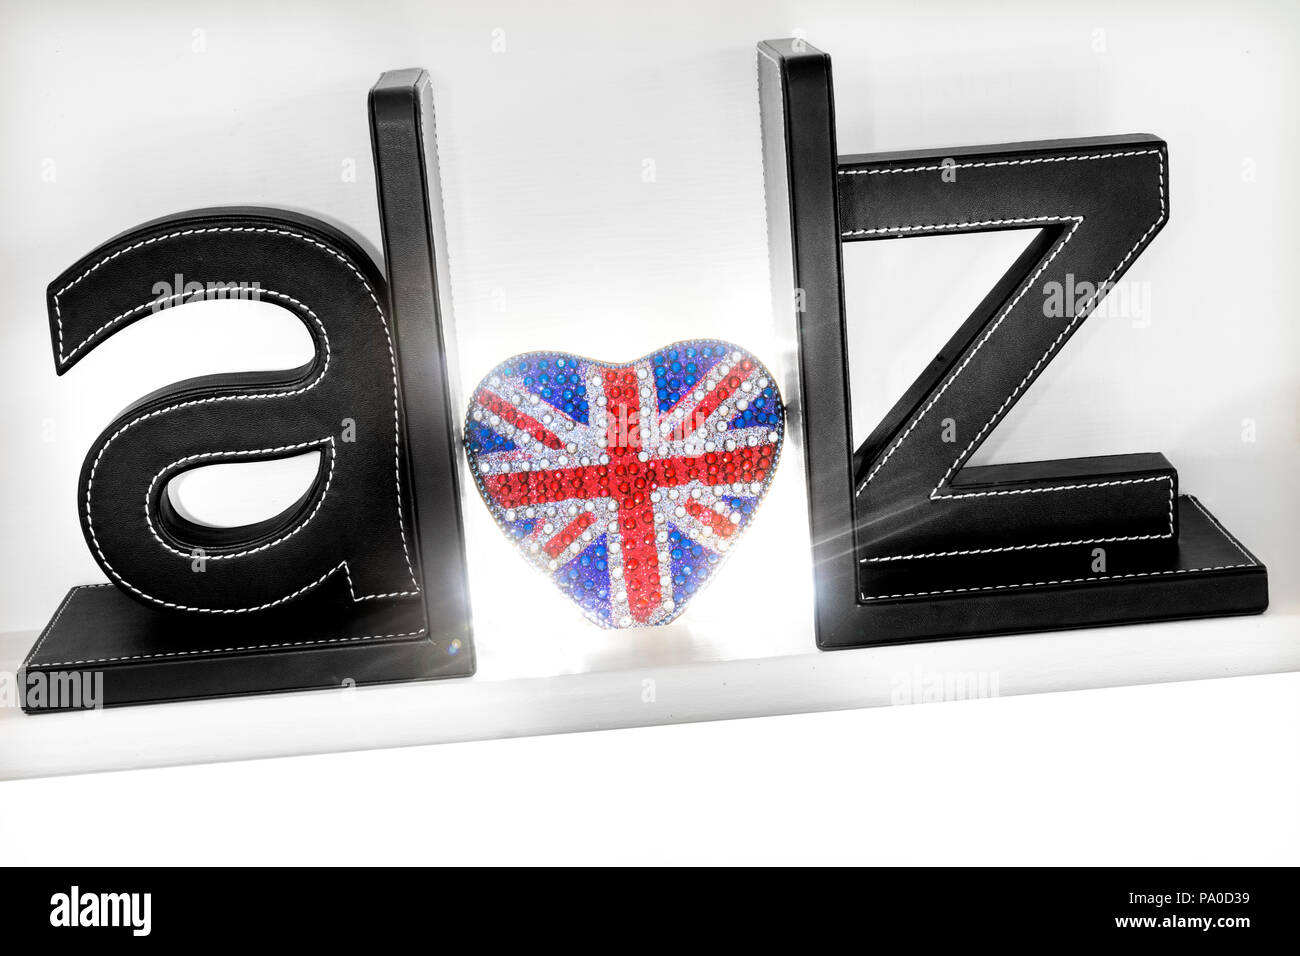 Concept A-Z three dimensional letters with sparkling heart shape Union Jack Flag motif shining out Love UK Travel Brexit Guide A to Z Britain Union Stock Photo